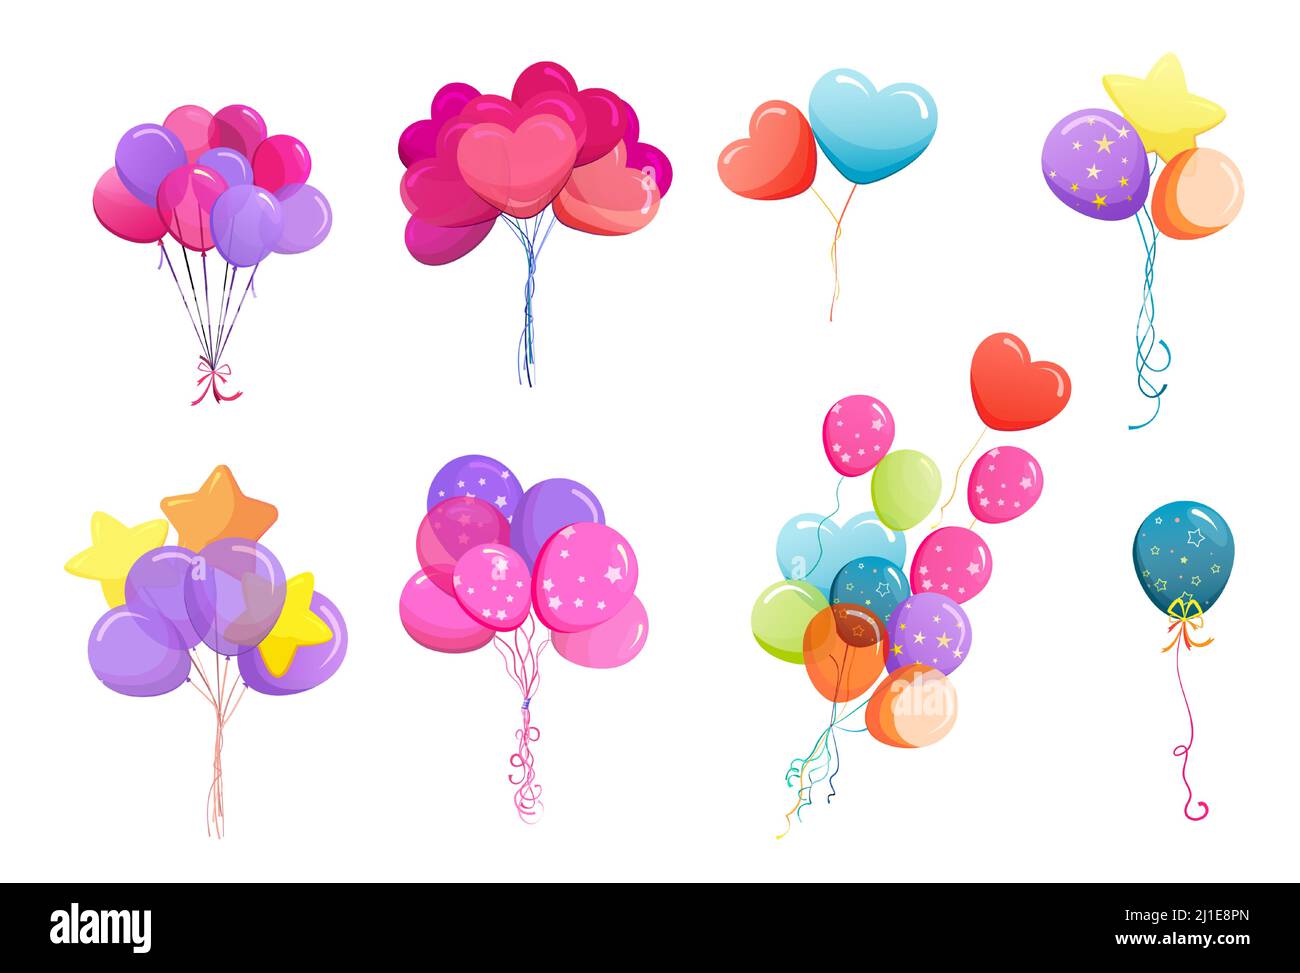 Bunch of Balloons on String Stock Vector - Illustration of together, pink:  174296729